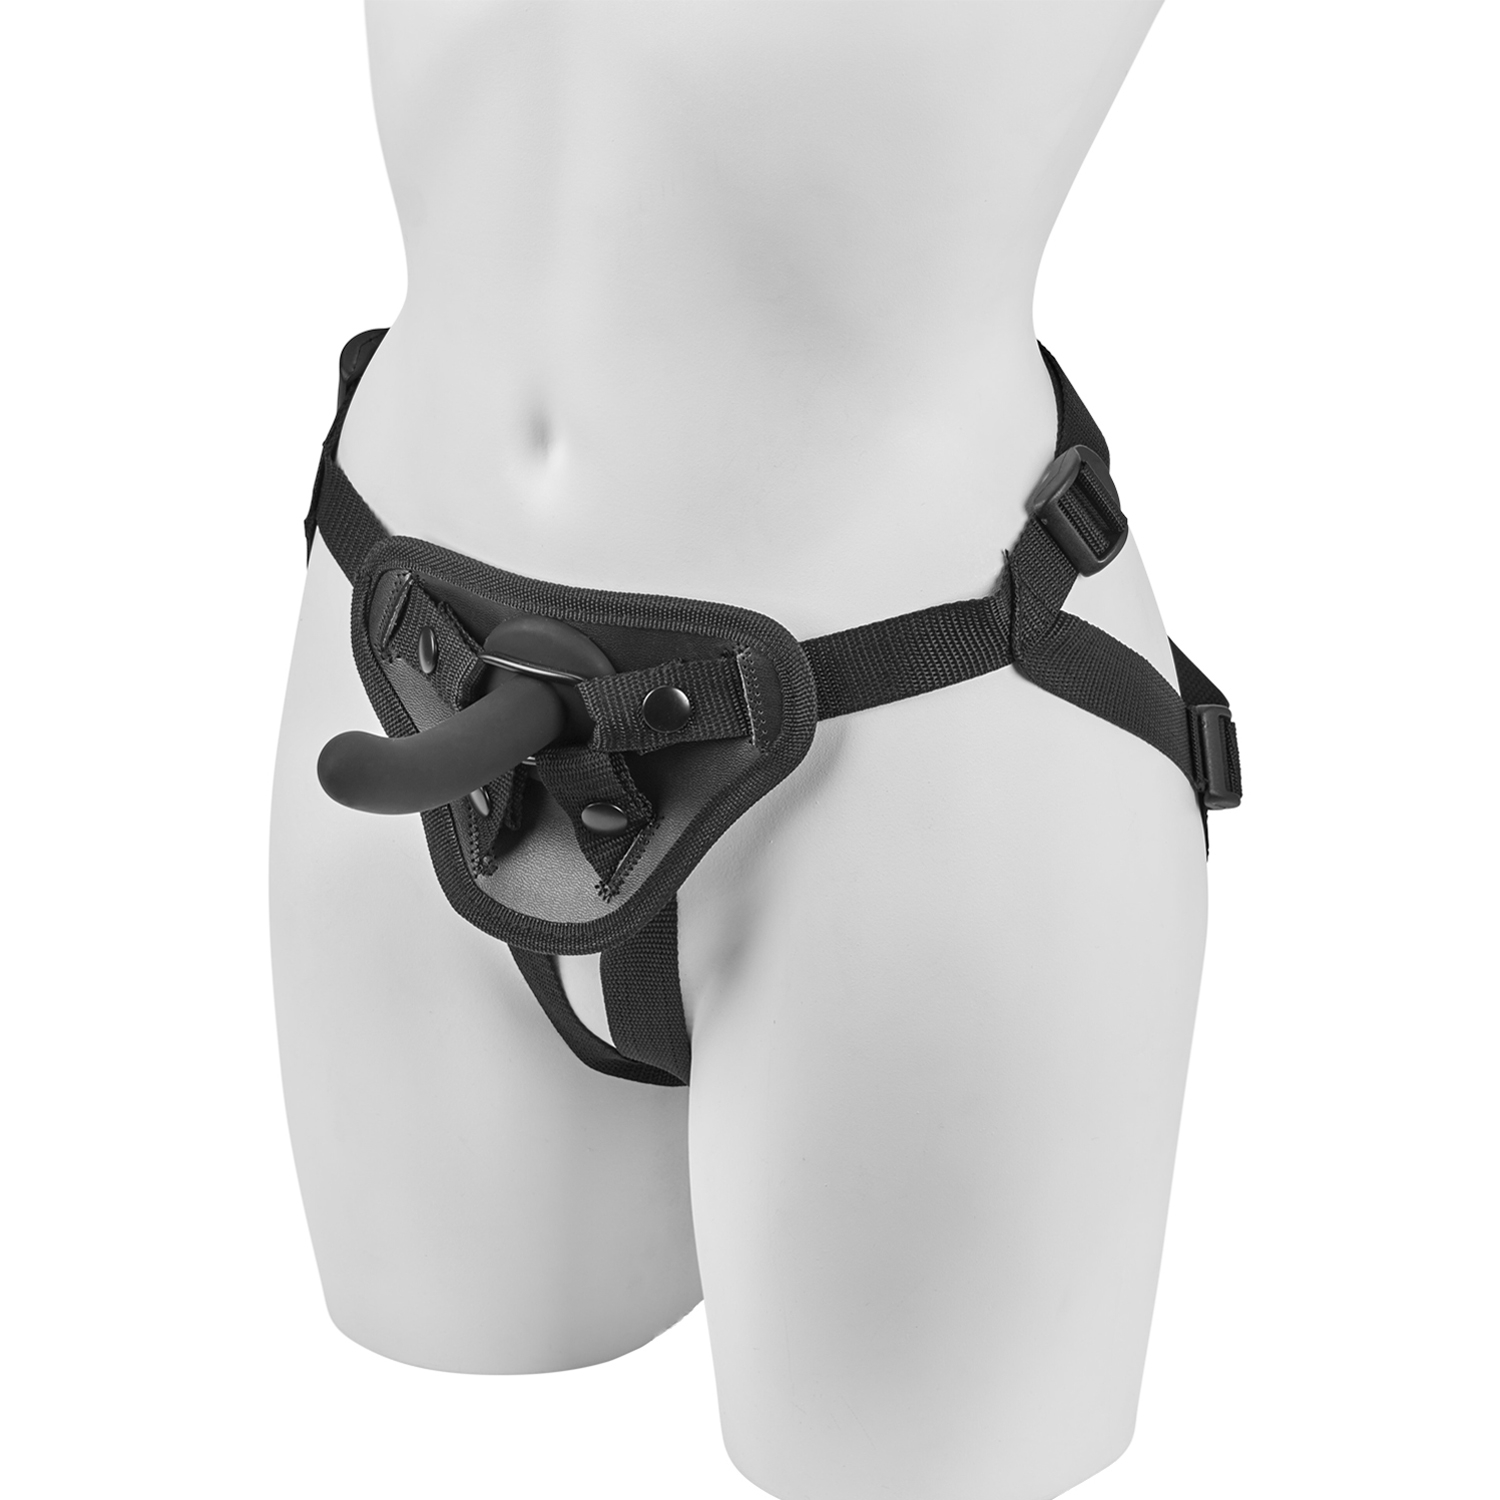 Obaie Unisex Strap-On Harness with Dildo - Obaie